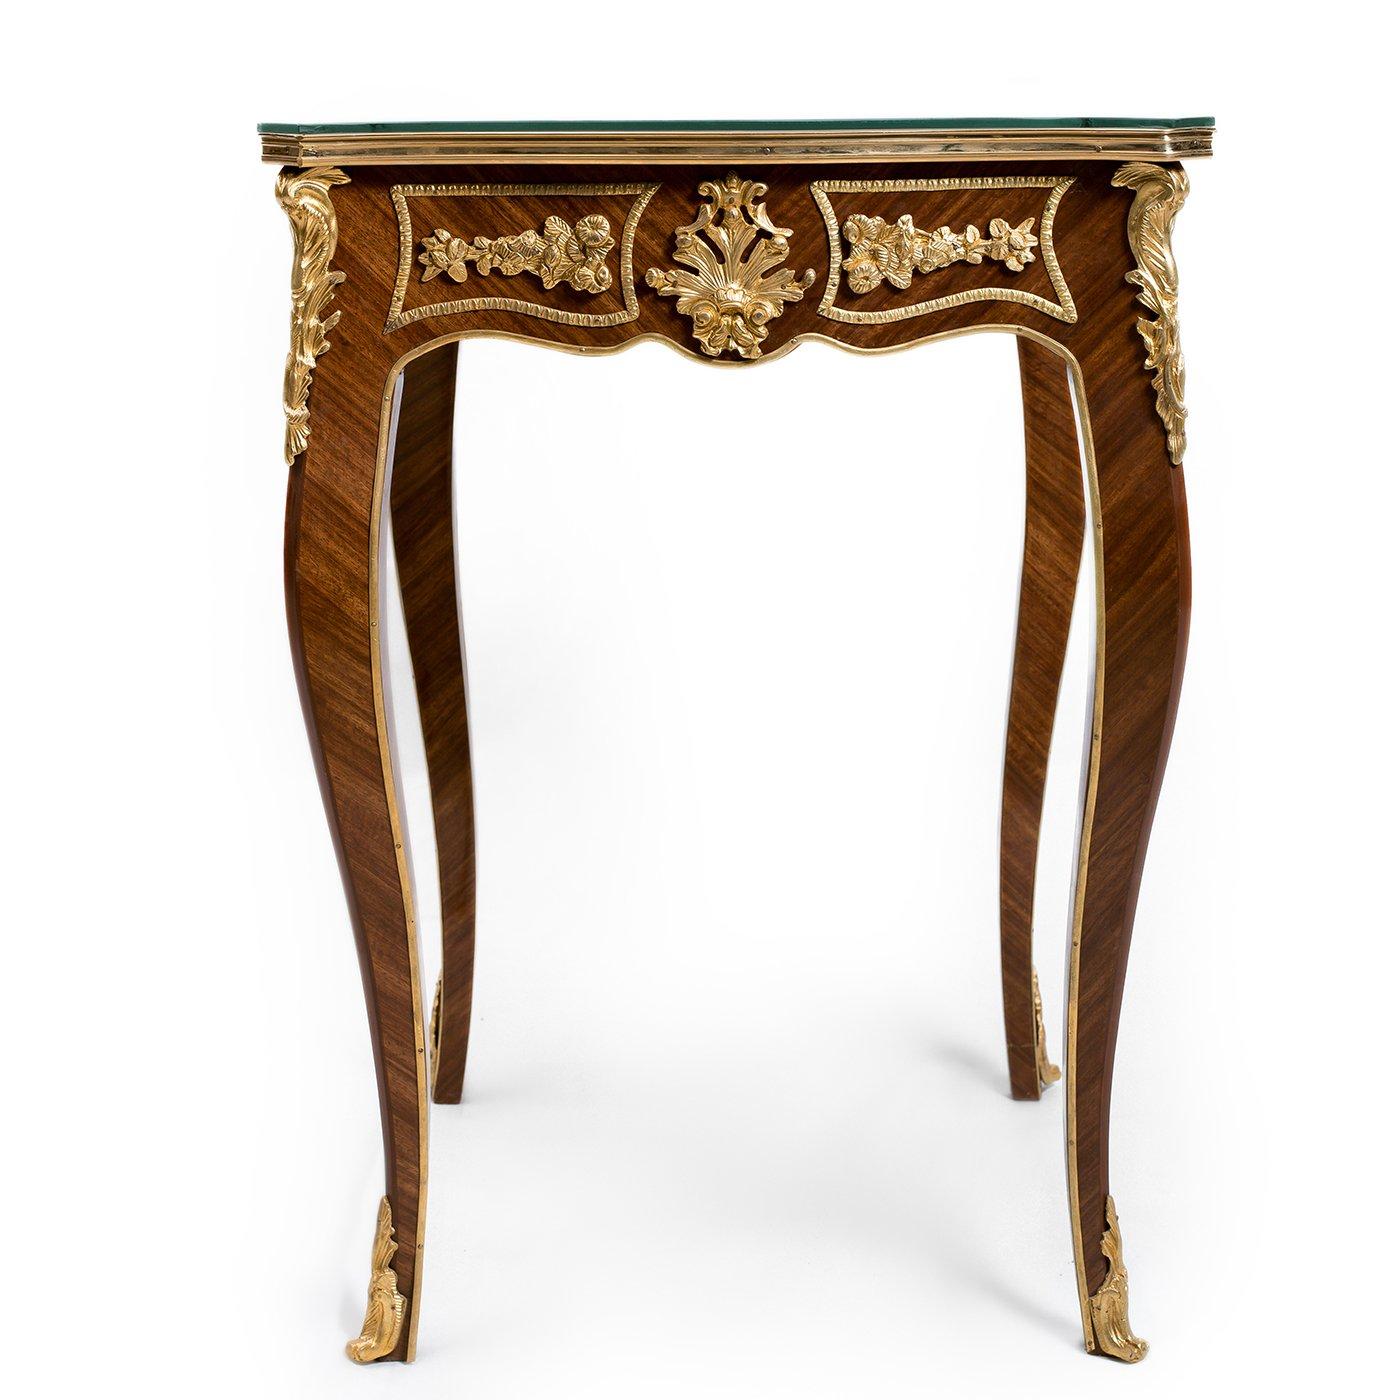 A stunning pair of 19th century ormolu French-style side table (2 set), 20th century.

A stunning pair of handmade side table, French Empire 19th century style. Made from beechwood decorated with Marqueterie Inlaid and elegant cabriole legs